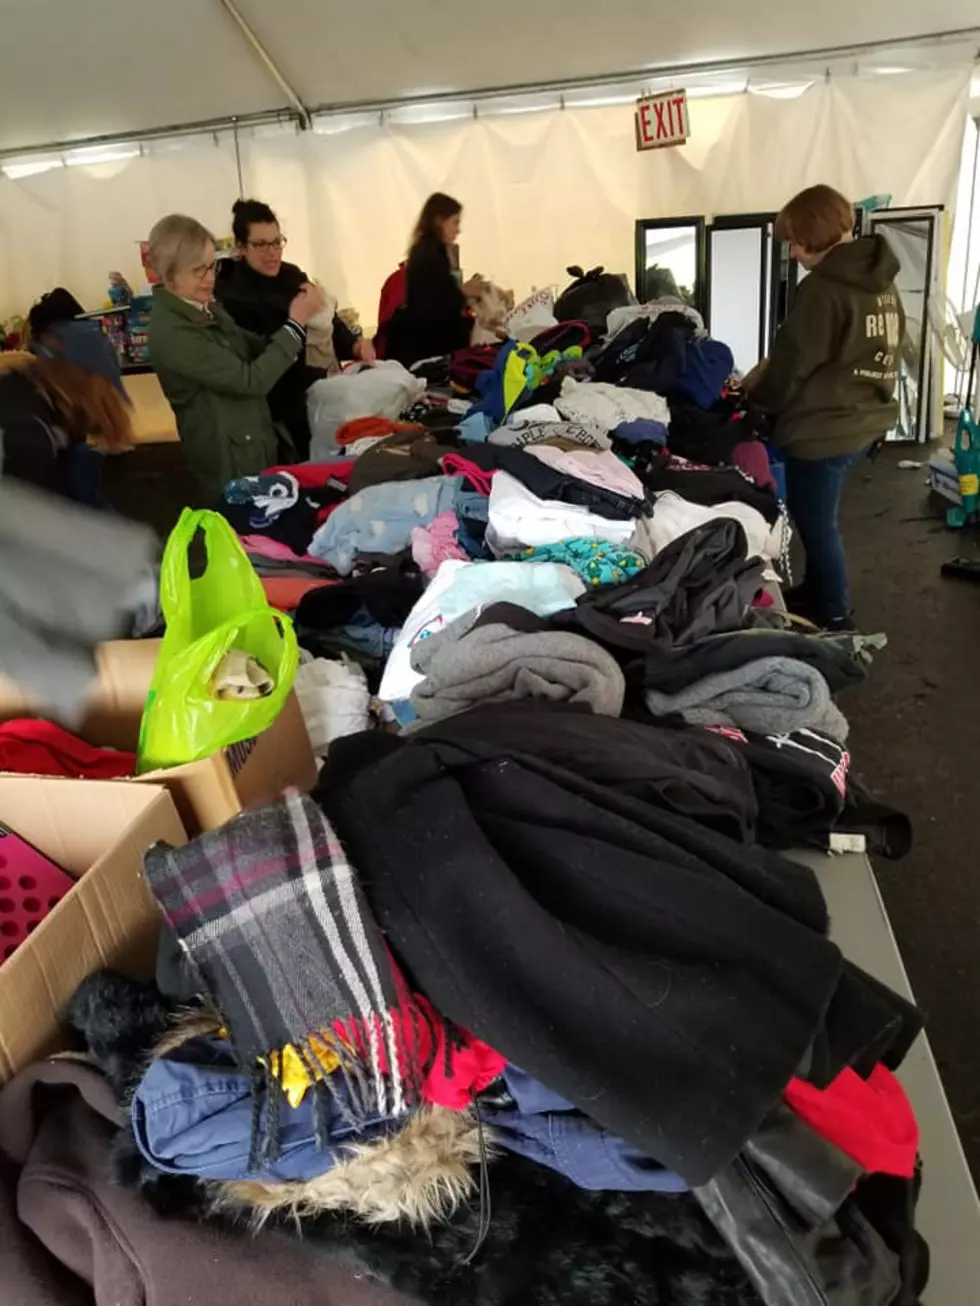 SUNY Oneonta Move Out Free Sale A Big Success